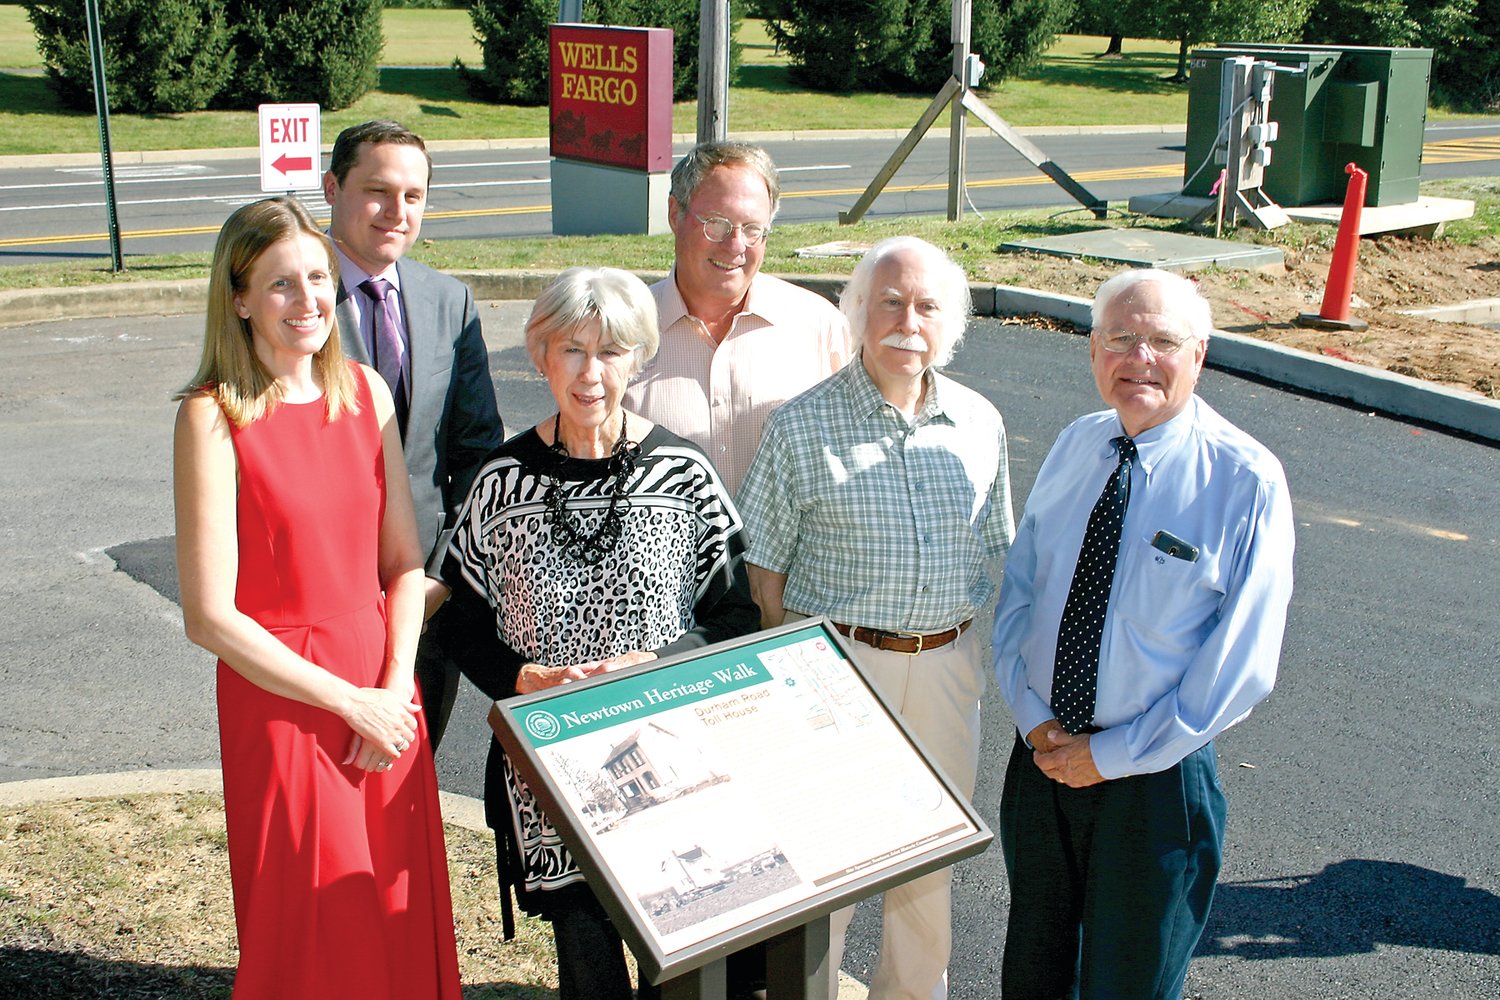 From left are Laura Parke-Carson, vice president leasing, Brixmore Property Group; Jason Brawer, senior leasing representative, Brismor: Lorraine Pentz, vice chair, Newtown Joint Historic Commission; Barry Fleck, president, Newtown Historic Association; Warren Woldorf, chair, Newtown Joint Histotic Commission; David Callahan, board member, Newtown Historic Association.